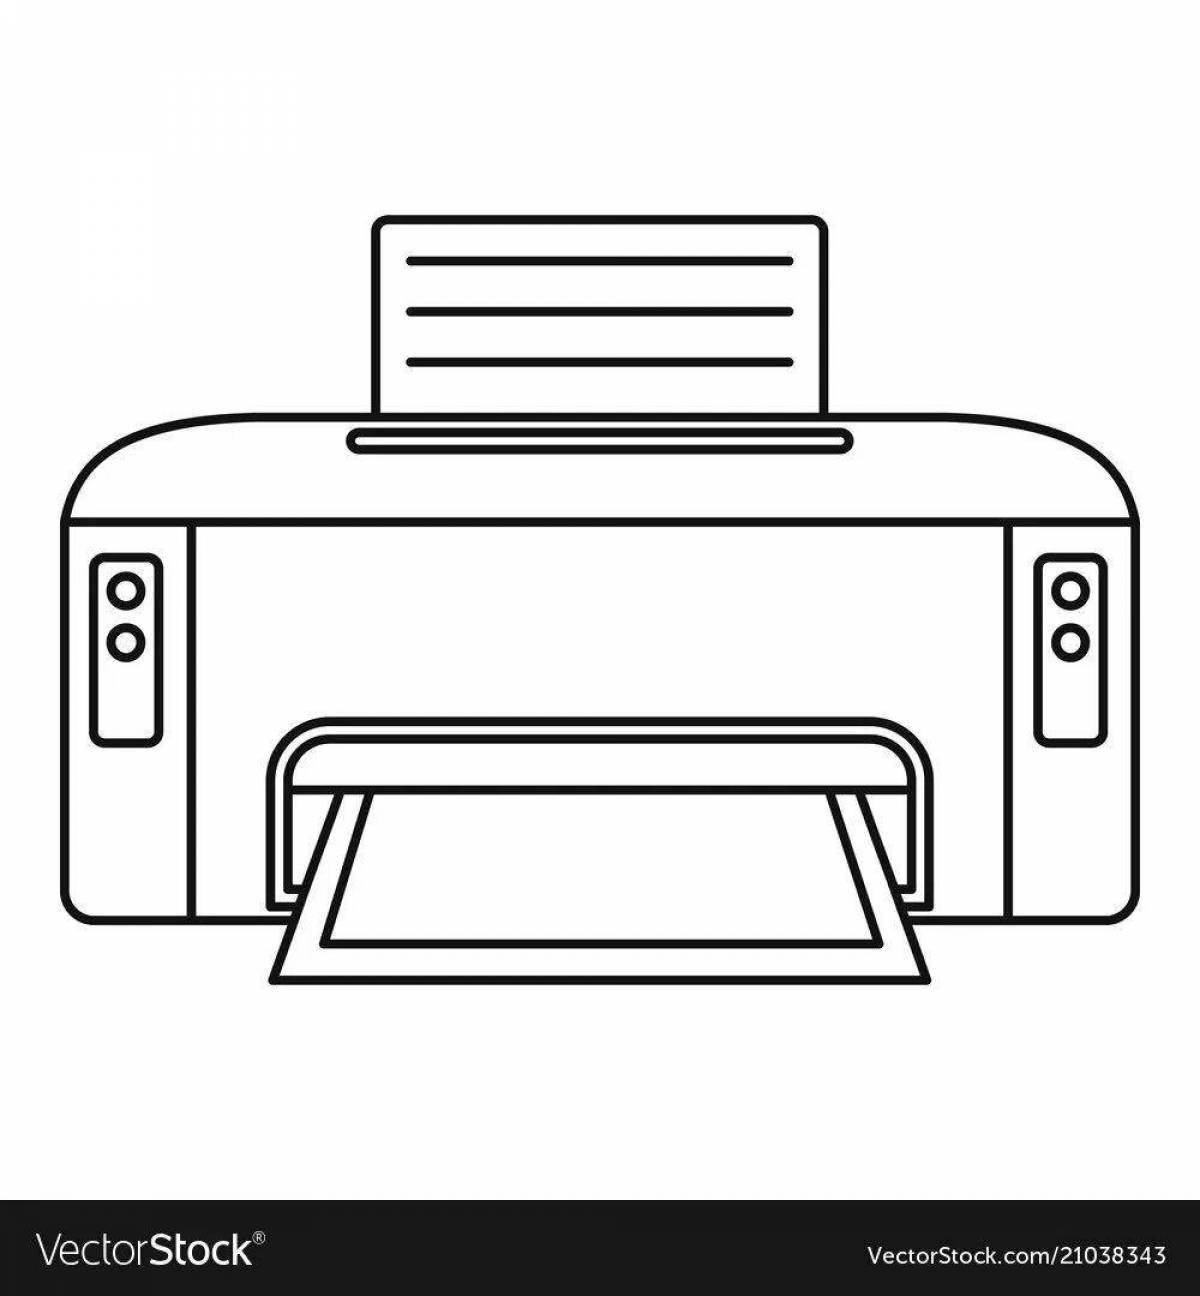 Coloring page with dynamic printer